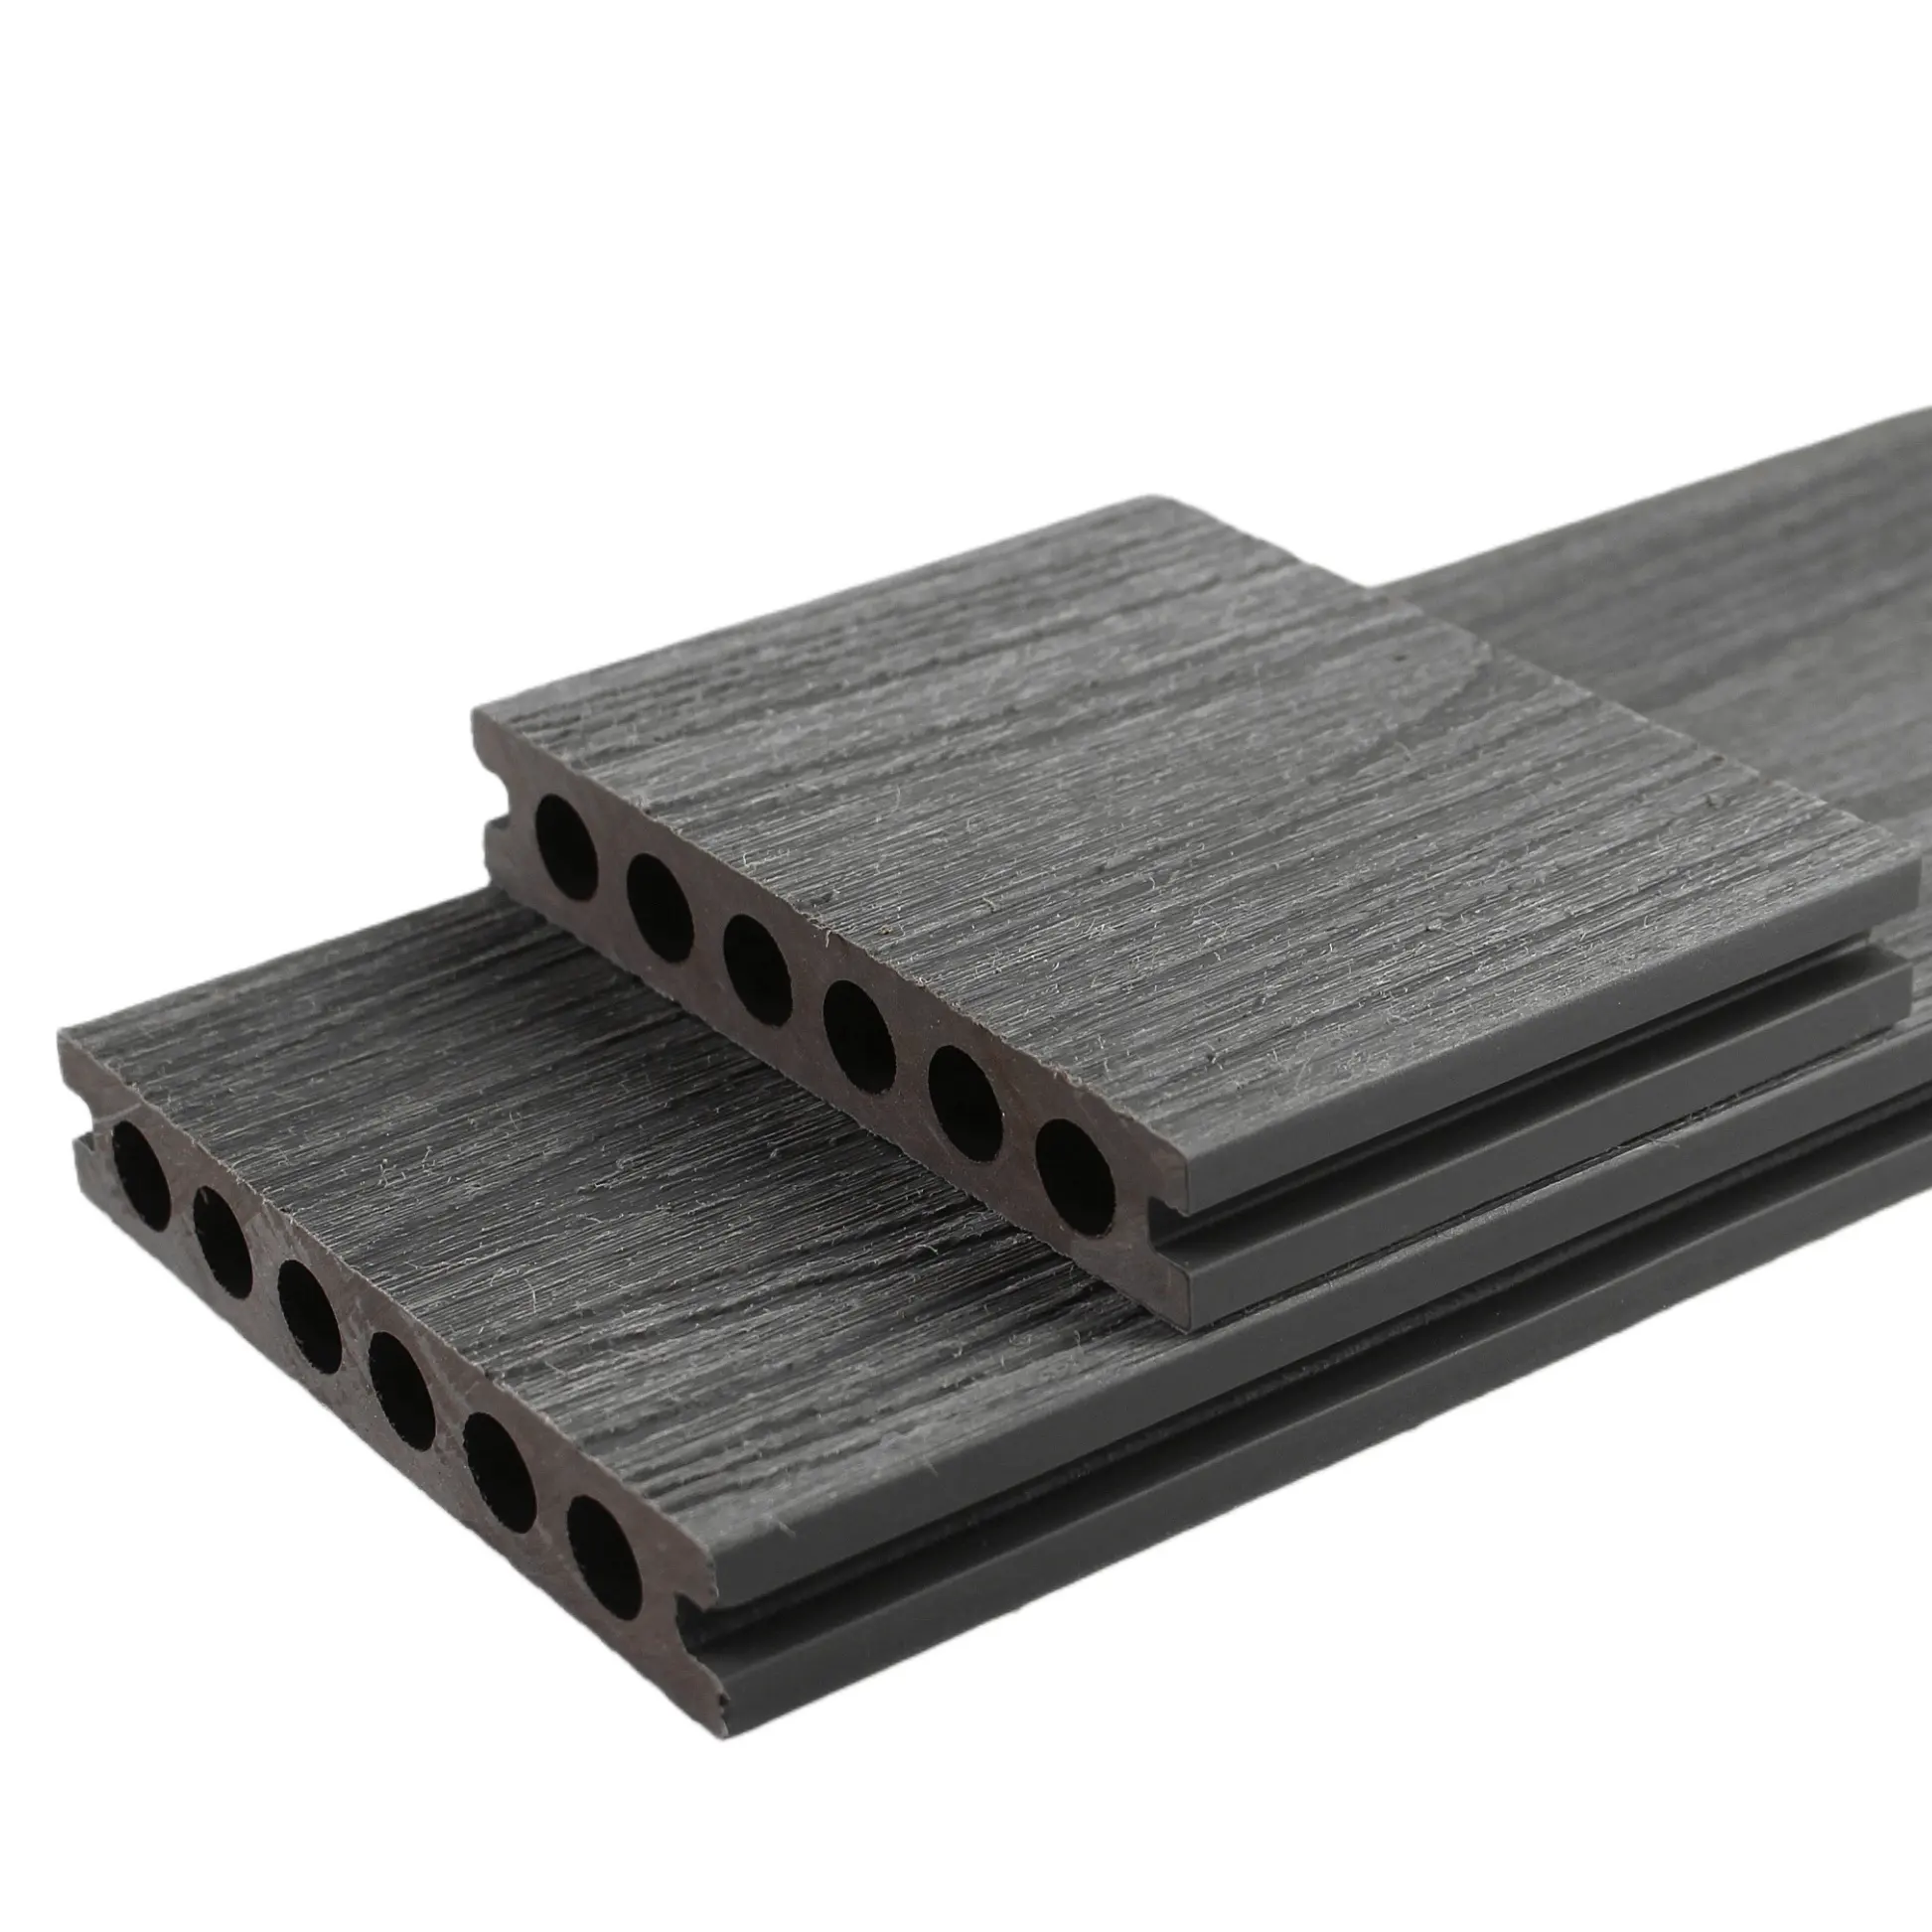 Barefoot friendly fireproof outdoor composite ECO hot AU WPC co-extrusion decking